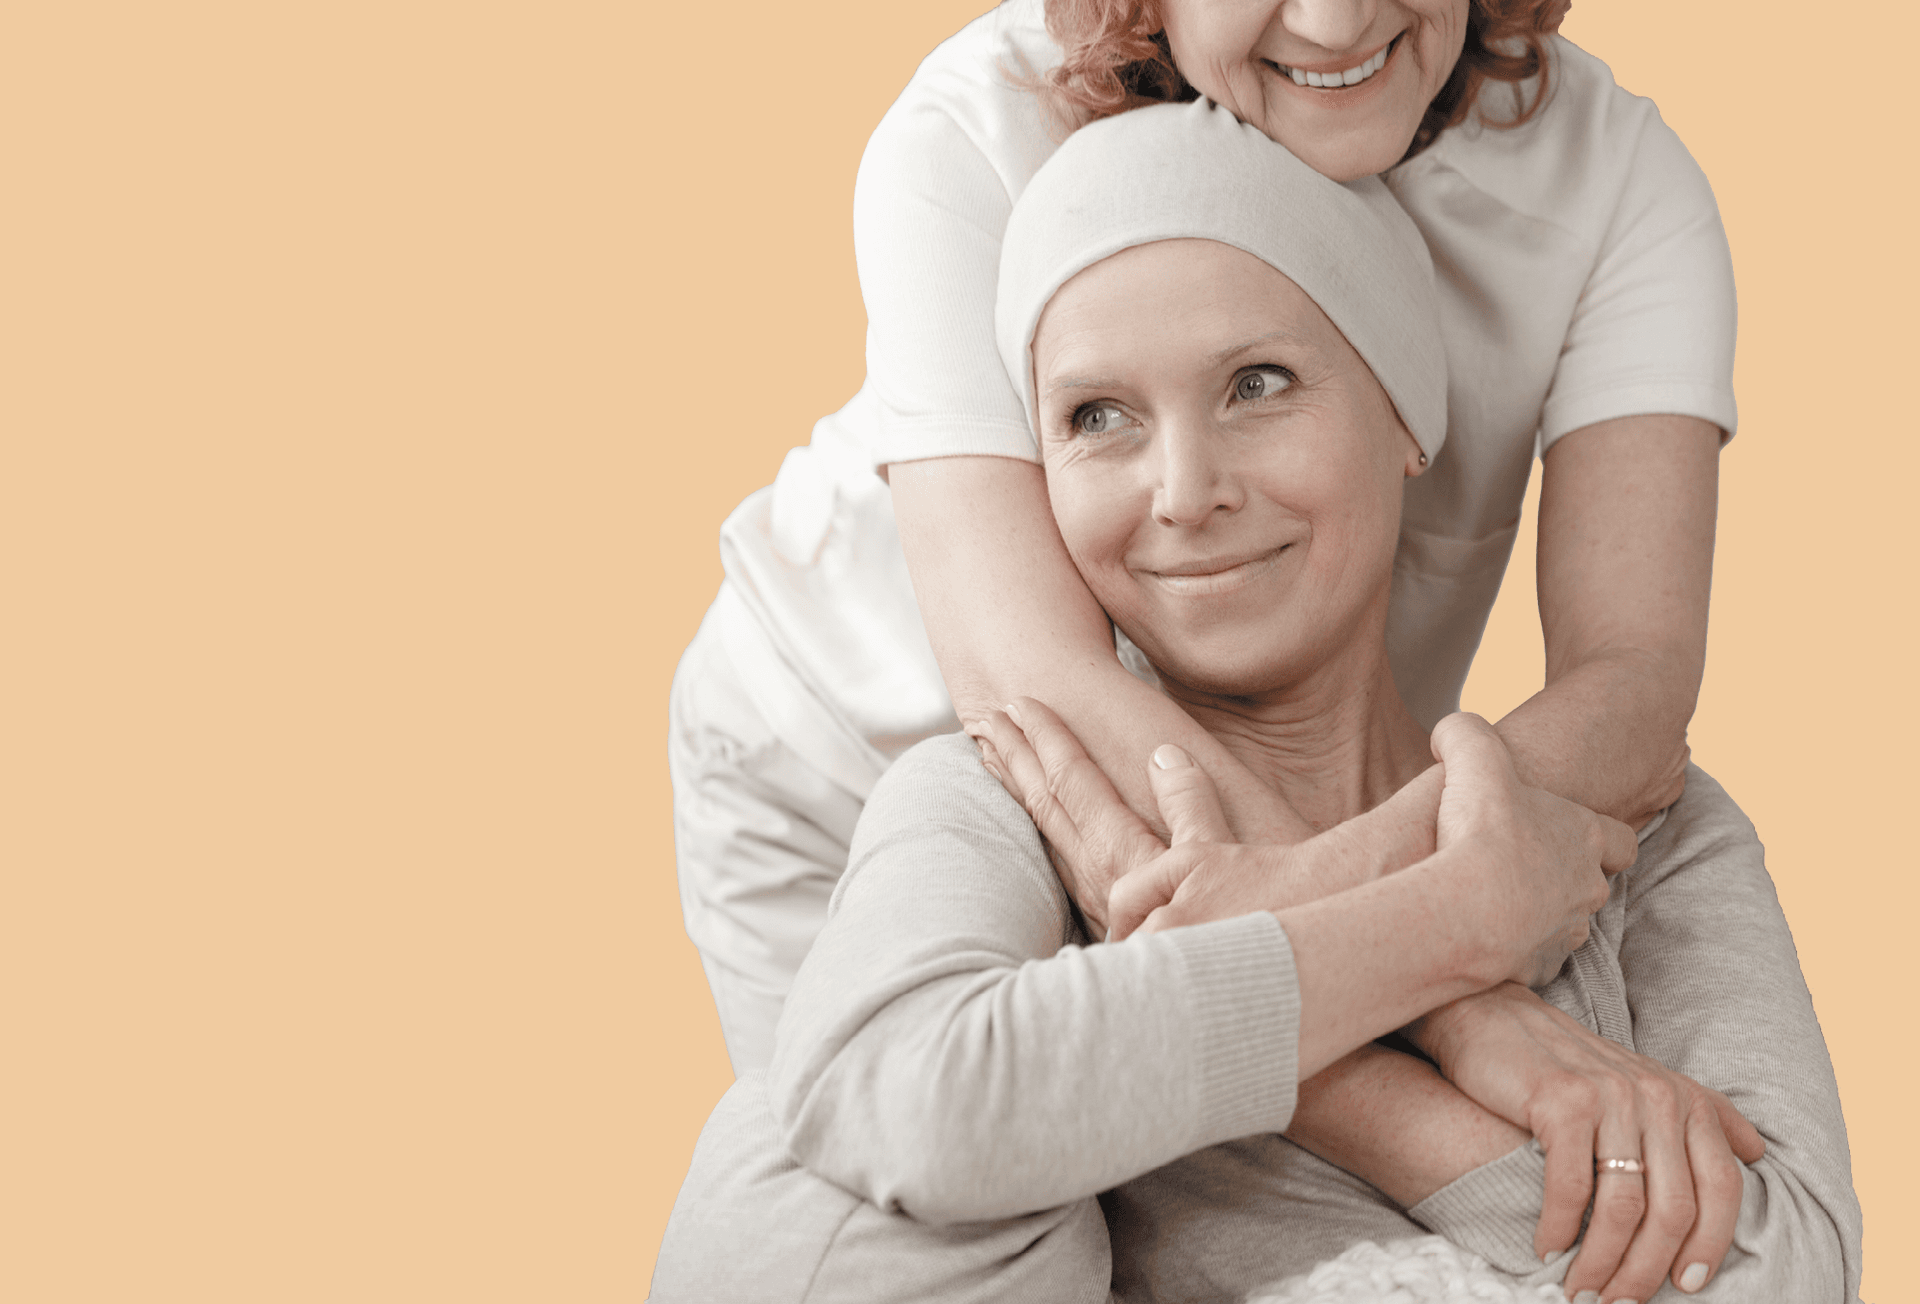 Woman on chemotherapy treatment being hugged and smiling